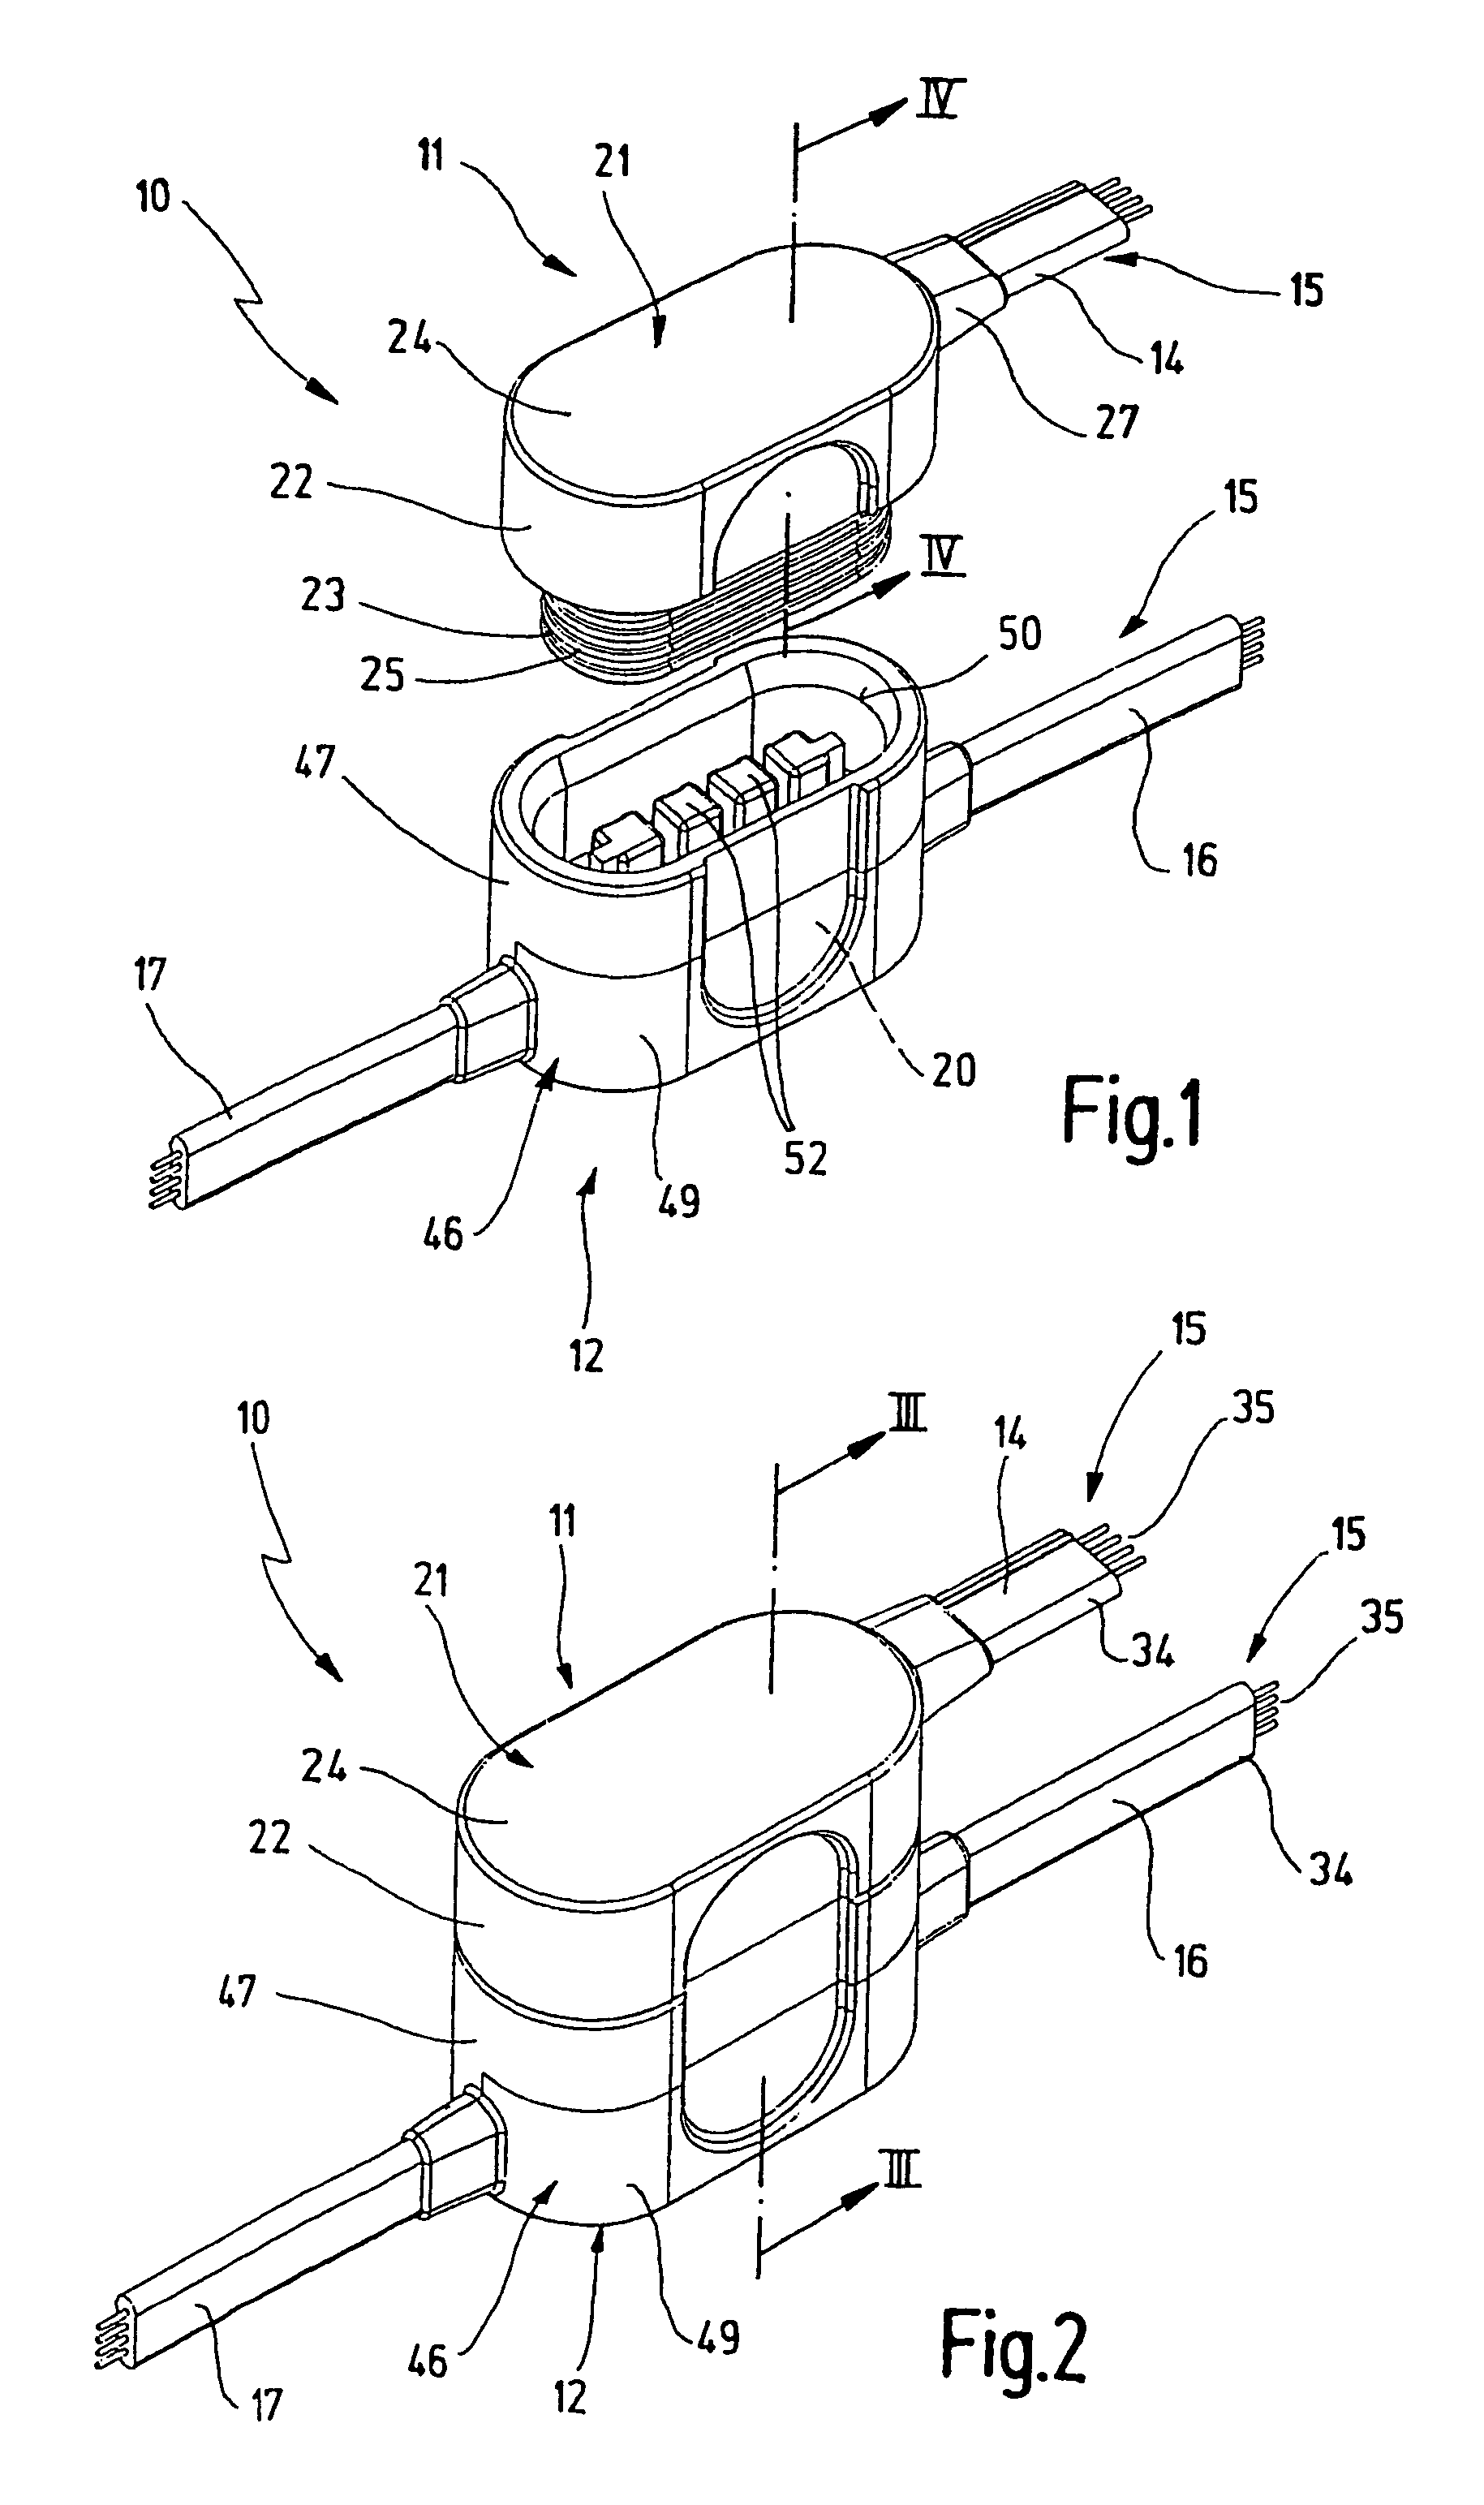 Plug connector device for multicore flat cables